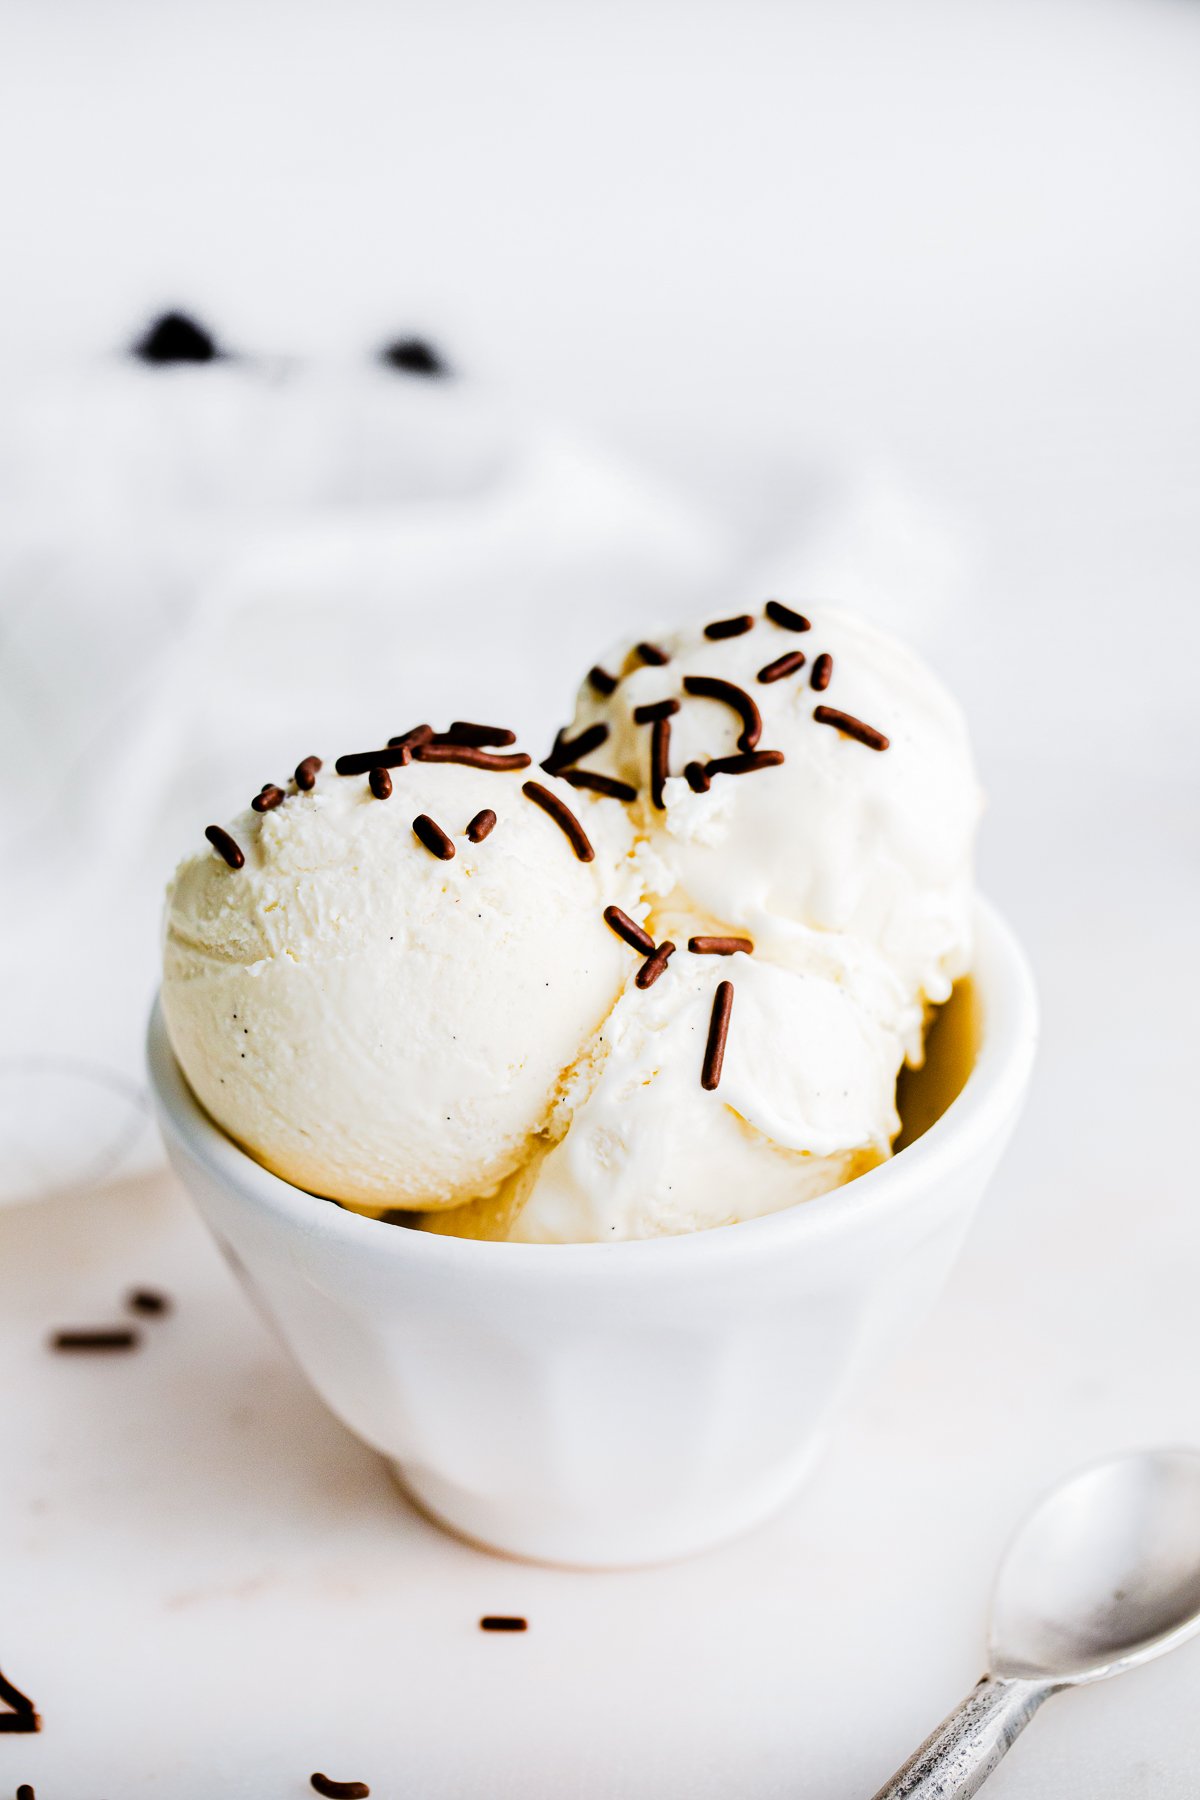 Ice cream in white bowl with chocolate sprinkles